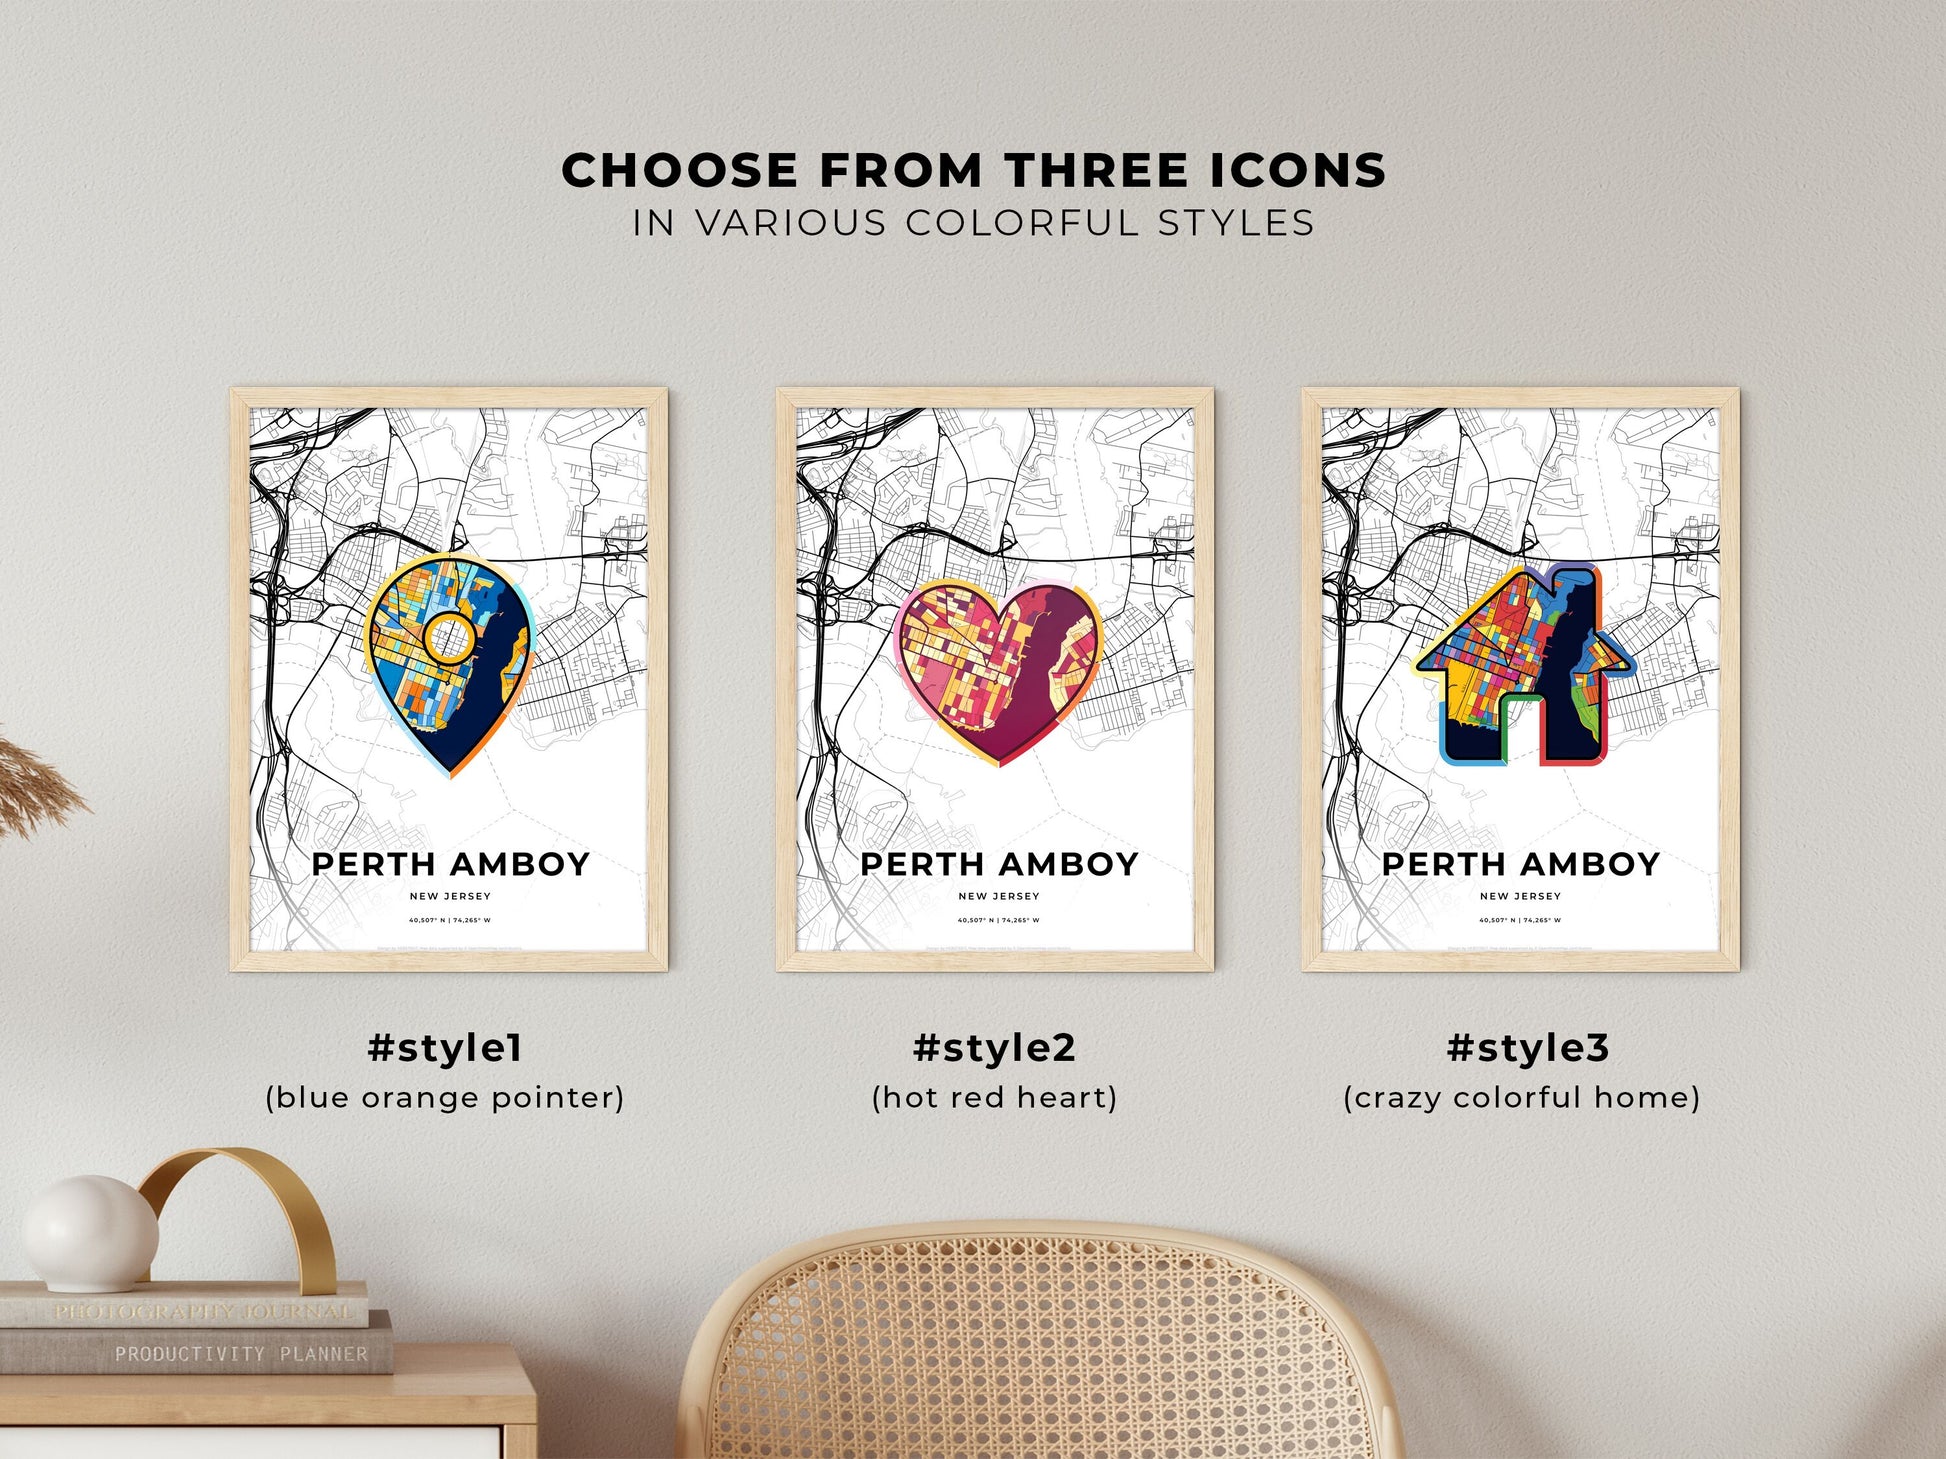 PERTH AMBOY NEW JERSEY minimal art map with a colorful icon.